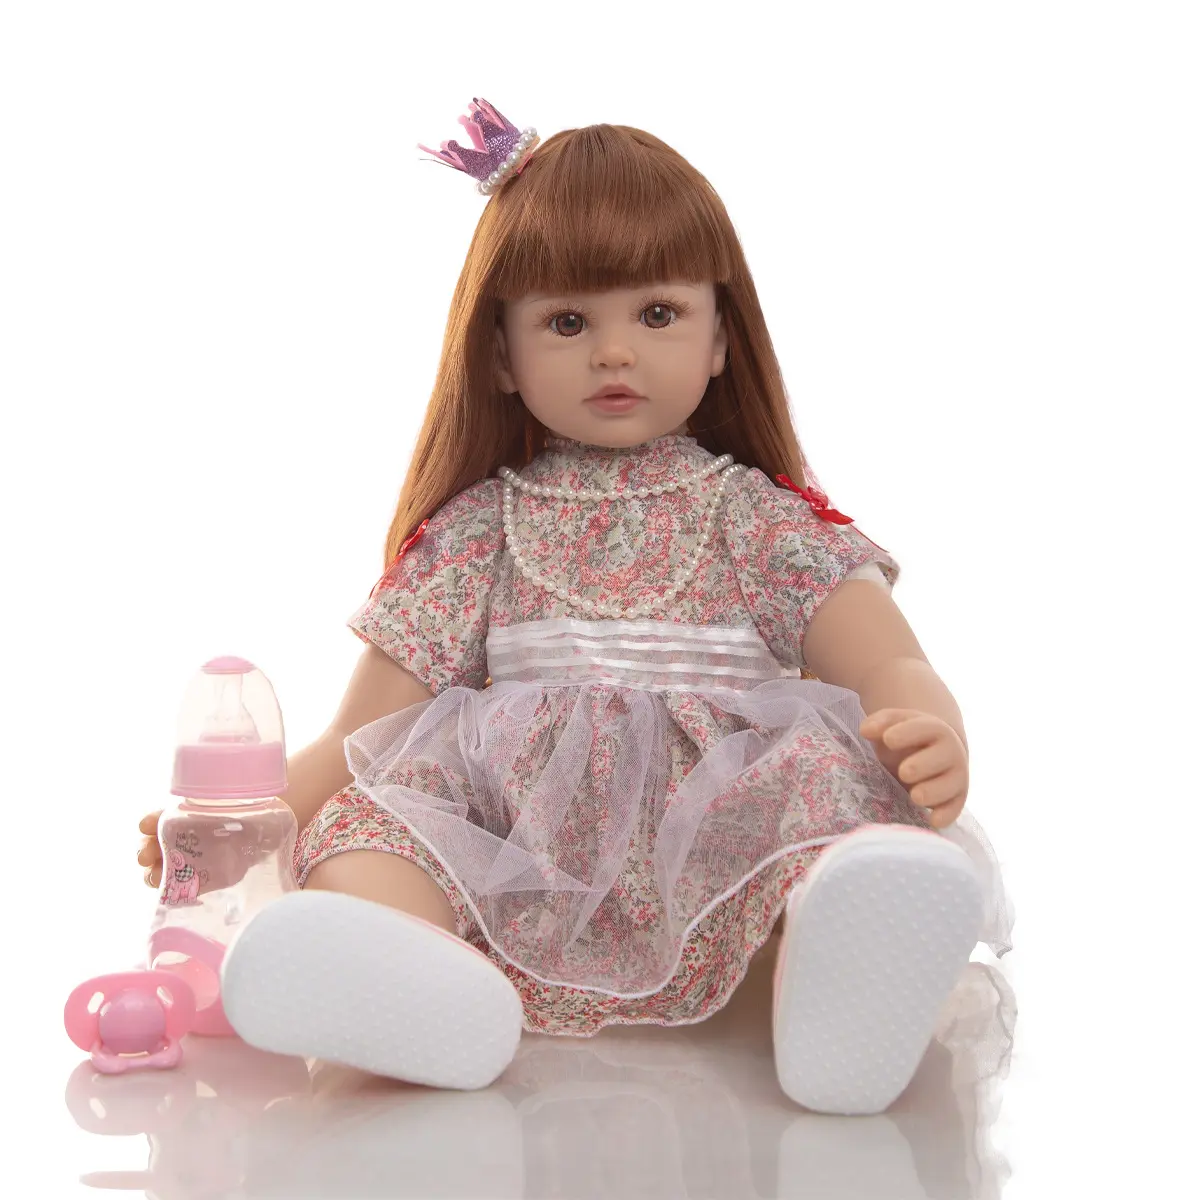 Amazon hot sale reborn doll 60cm Cute Girl with long hair silicone reborn baby dolls for girl's gift